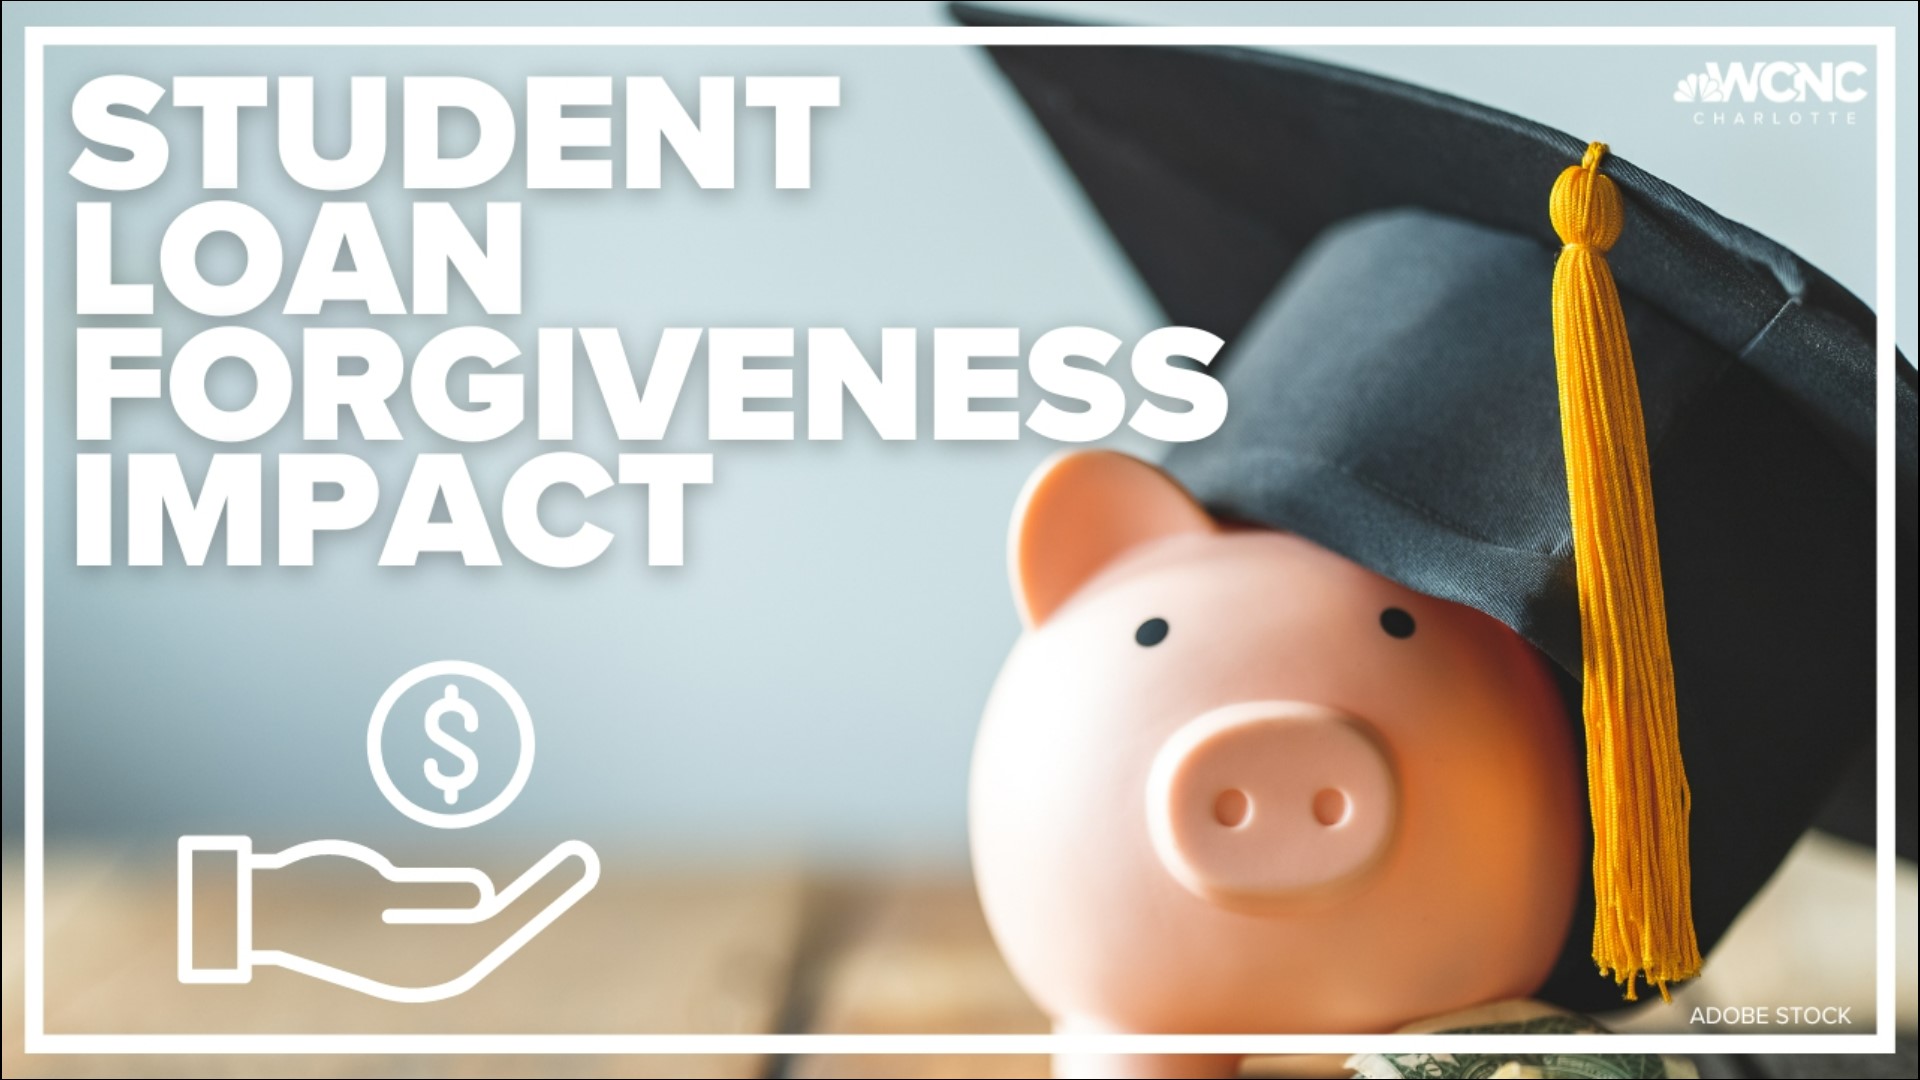 More details on the impact of the Federal student loan debt relief program.